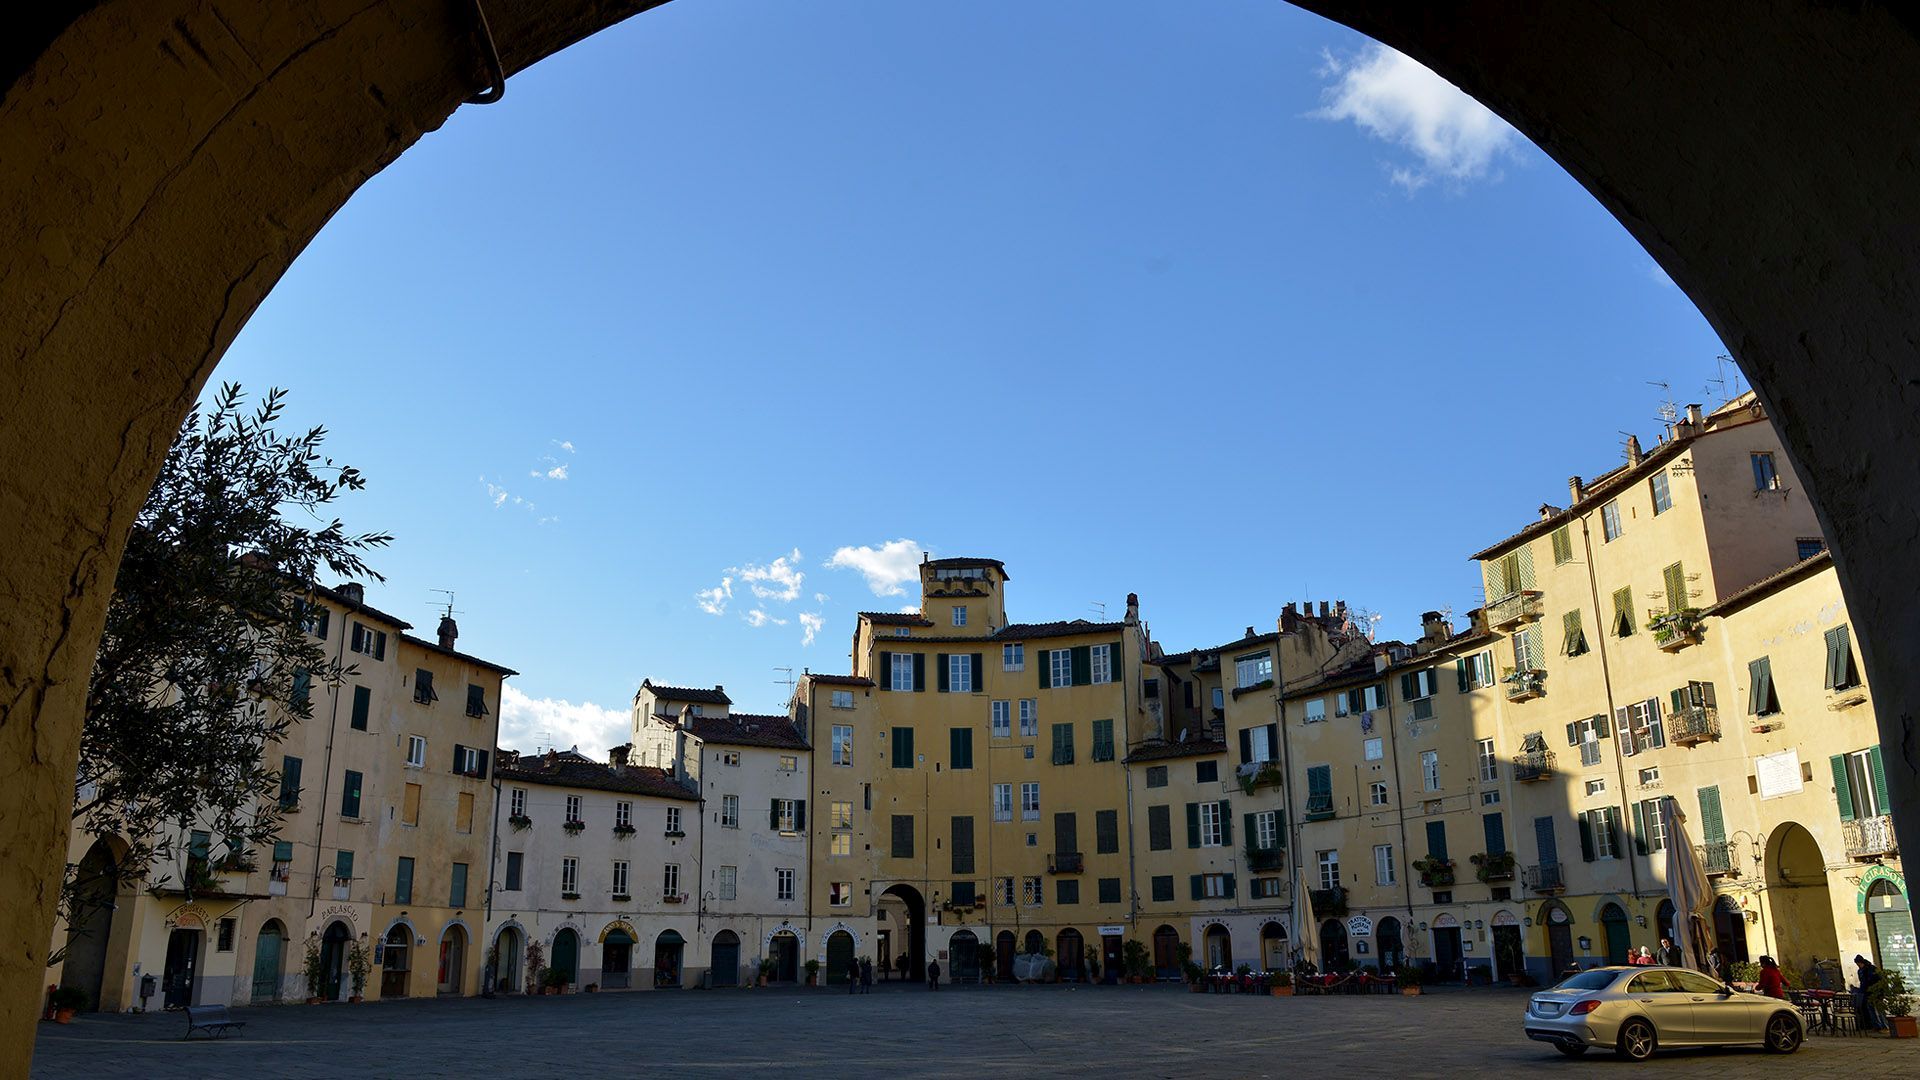 entrance arch of the Piazza Anfiteatro in Lucca